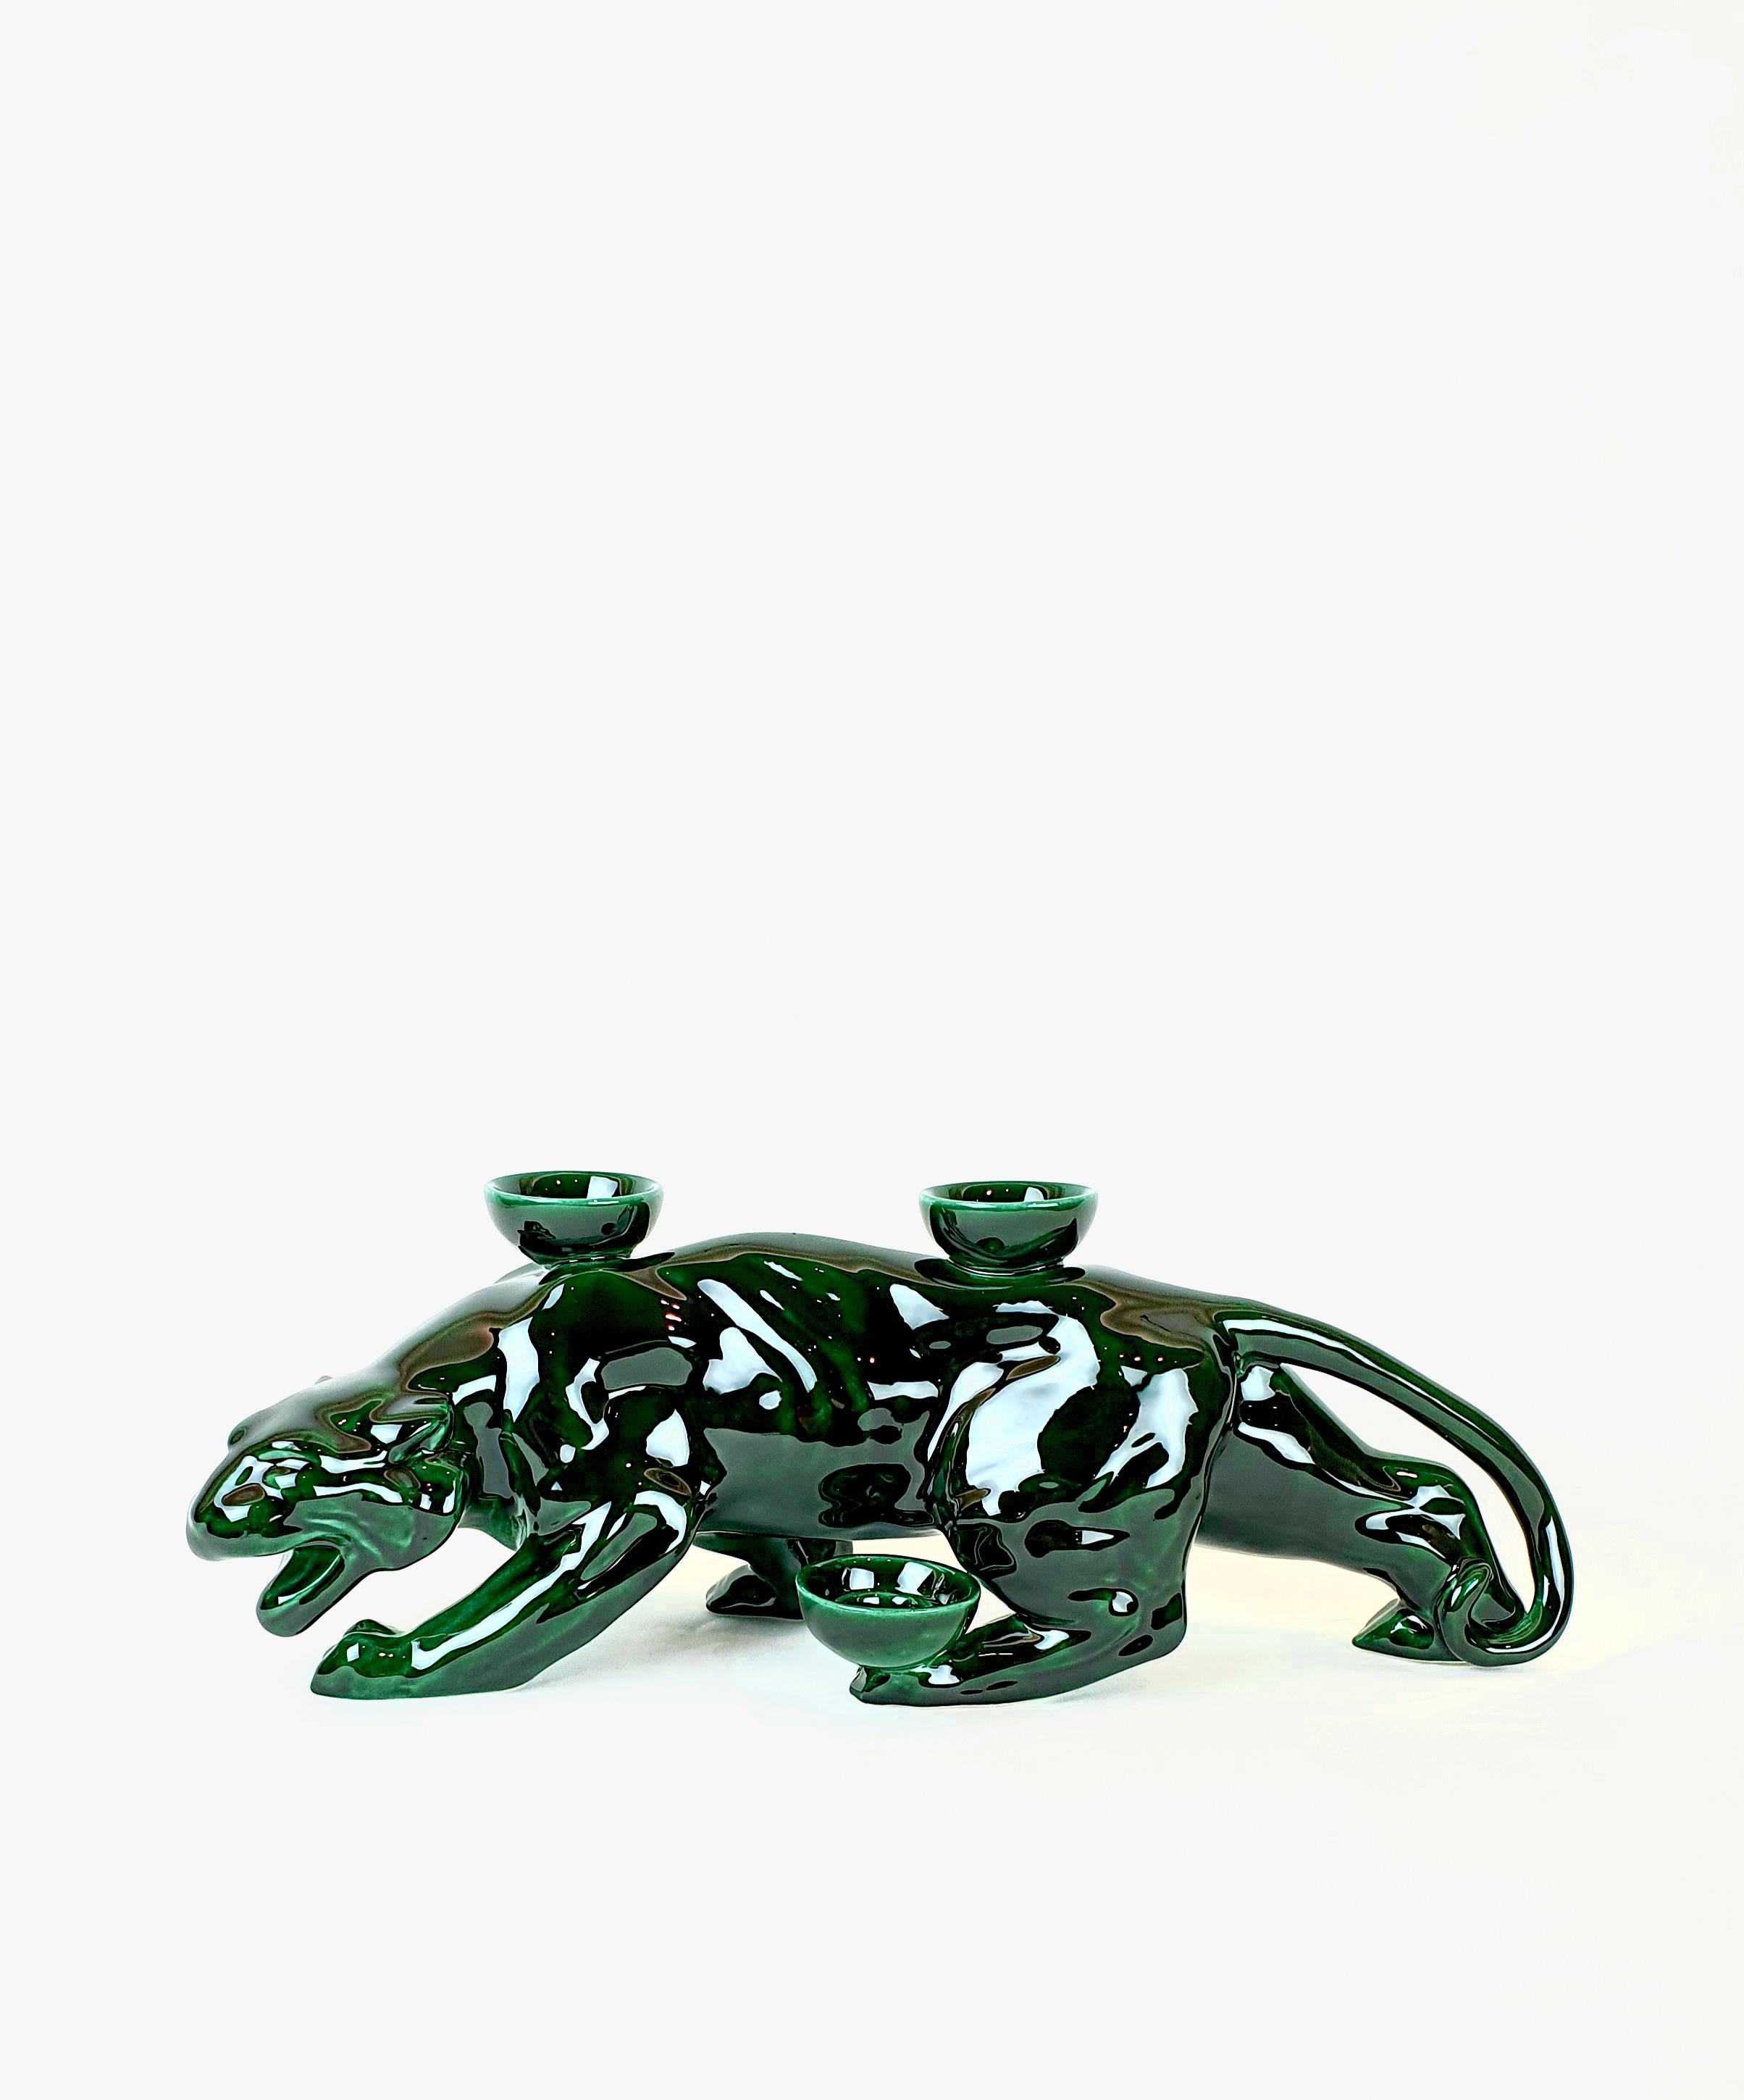 Modern Ceramica Gatti 1928 Ceramic Green Forest Panther Candle Holder For Sale 1